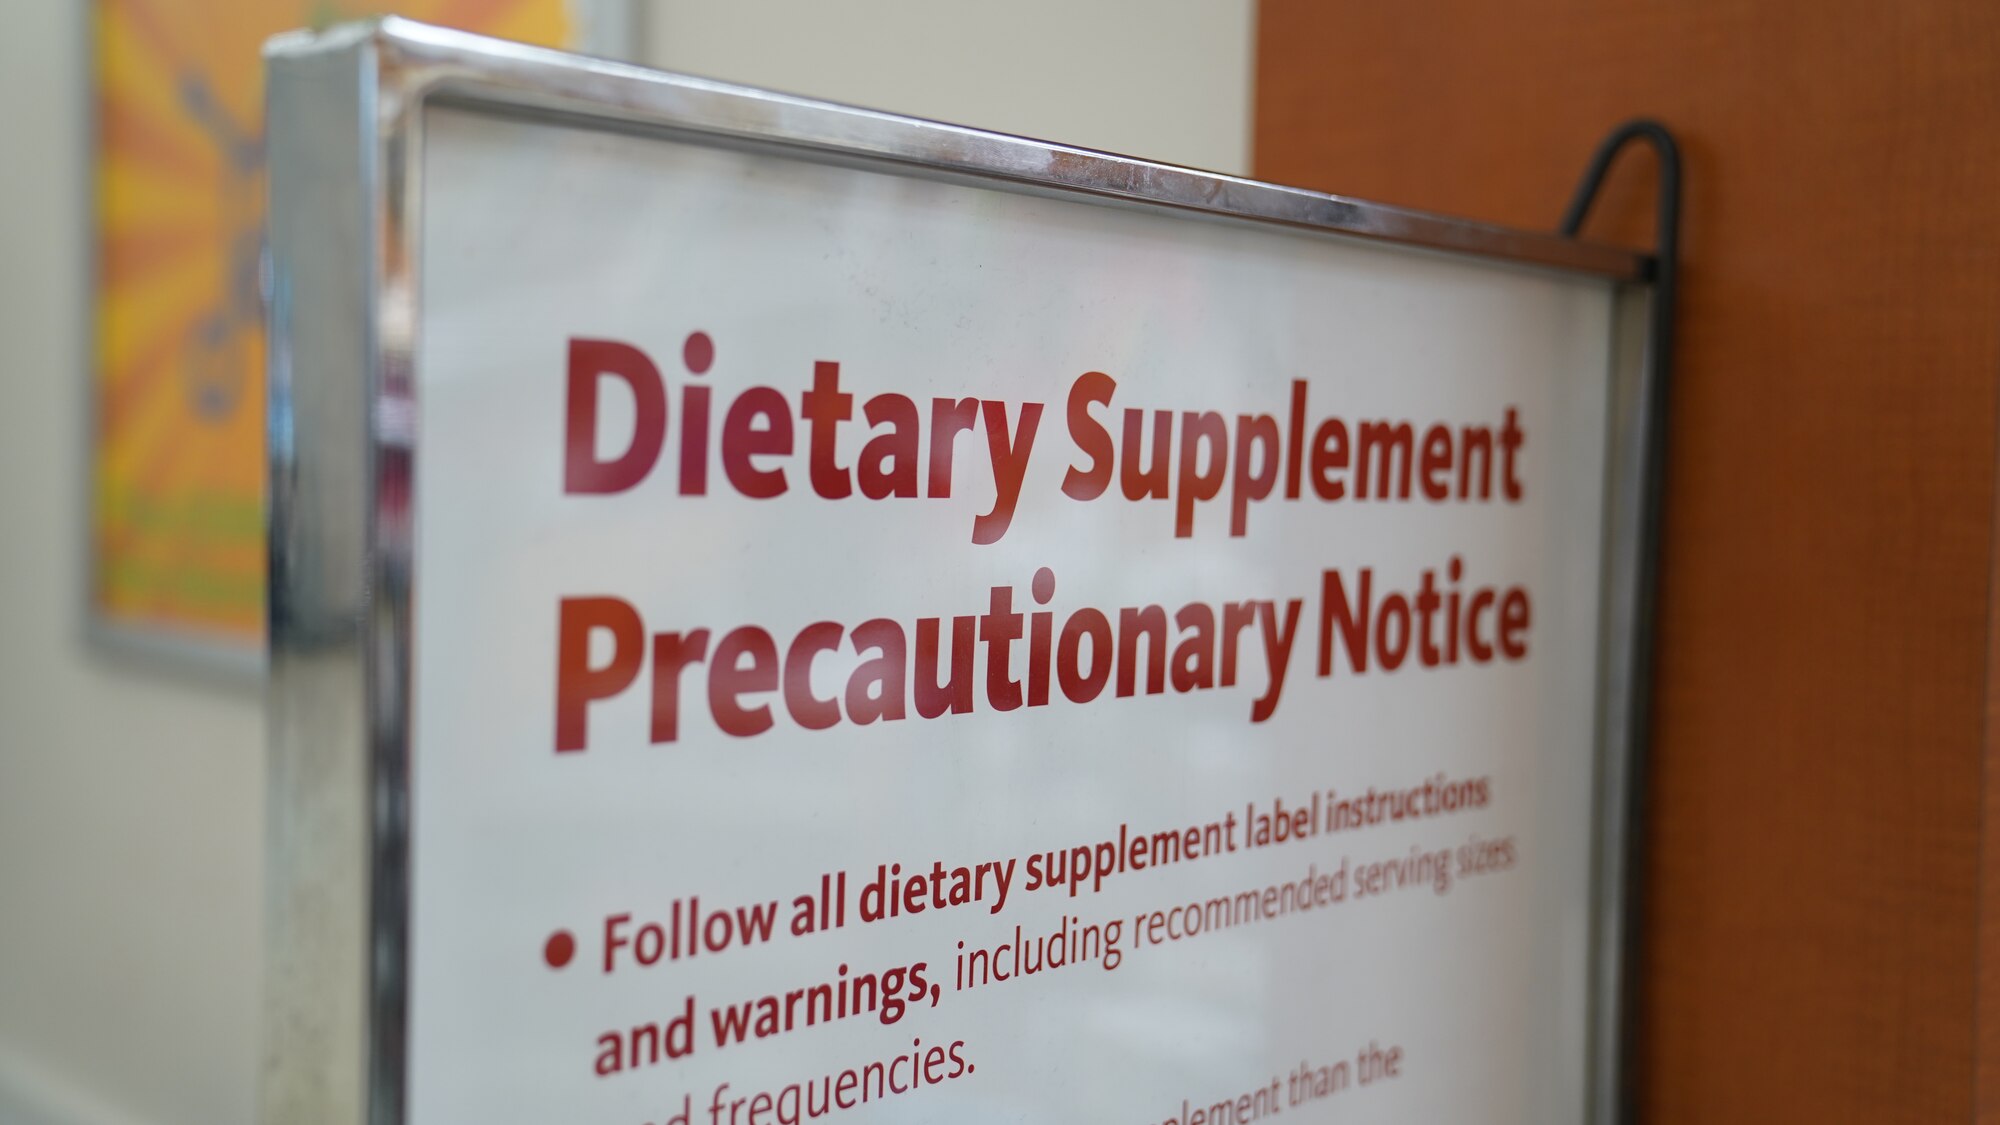 A dietary supplement warning sign is displayed at the Base Exchange on Keesler Air Force Base, Mississippi, Aug. 16, 2022. All stores within the exchange are required to purge their inventories of any products containing banned substances for Department of Defense employees listed on the DoD Prohibited Dietary Supplement Ingredients List.